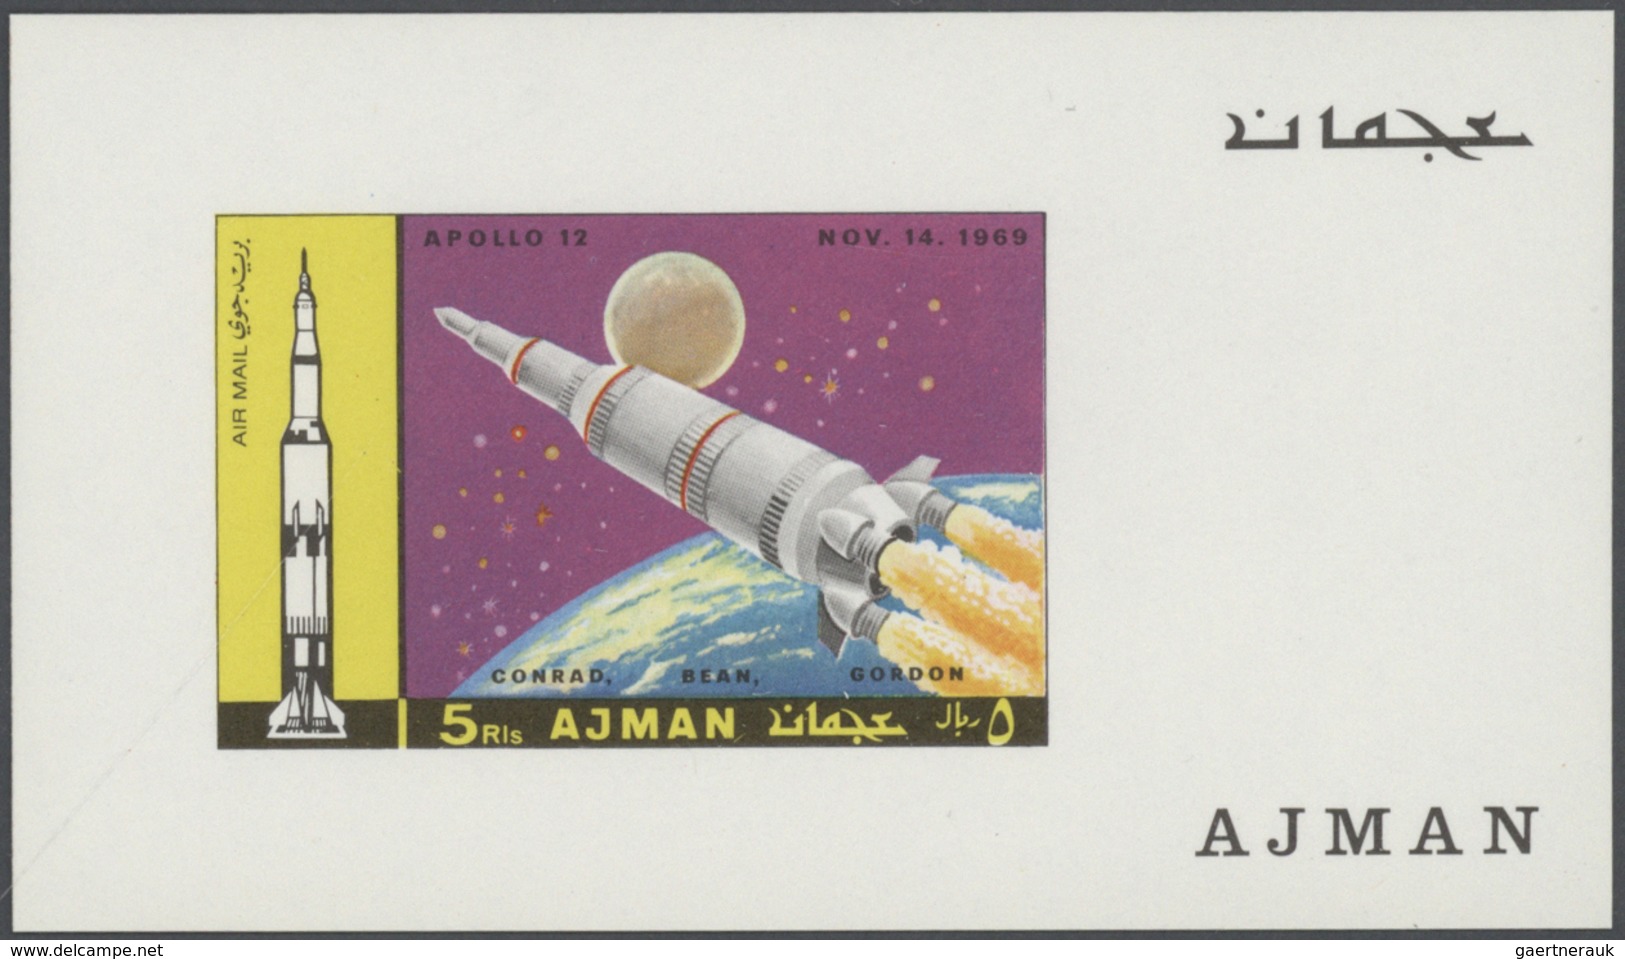 Adschman / Ajman: 1971/1972, U/m Collection Of Apprx. 386 De Luxe Sheets With Apparently Only Comple - Adschman